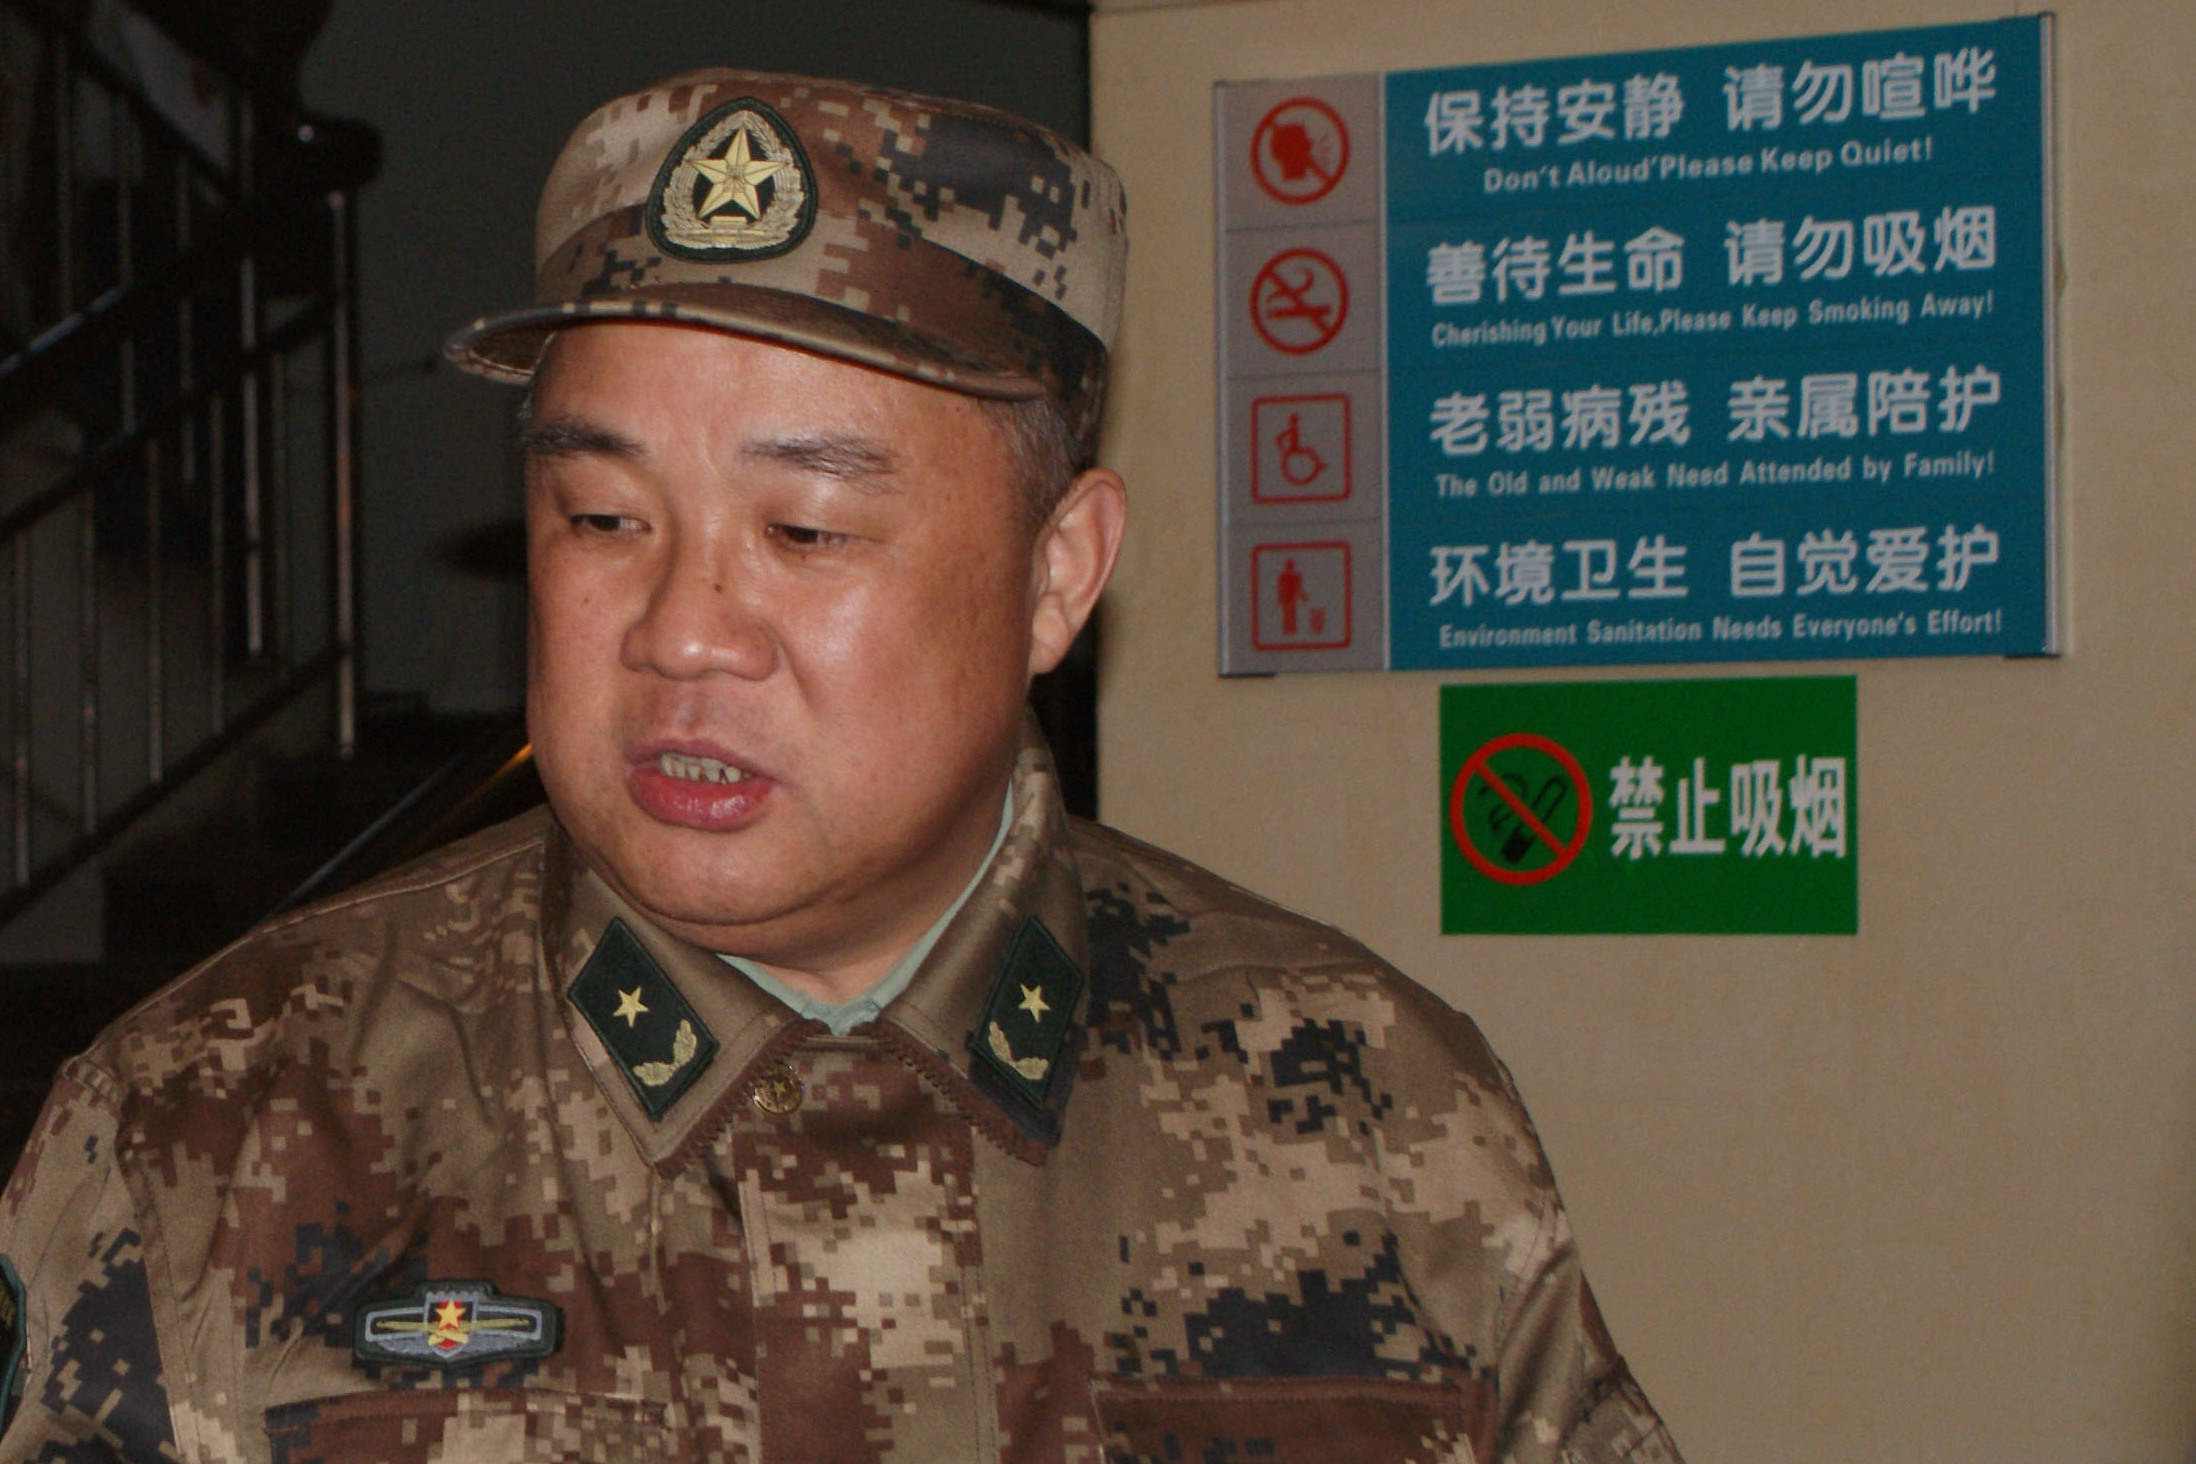 Zhan Guoqiao, the former head of the Joint Logistics Department of the Lanzhou Military Region, in the west